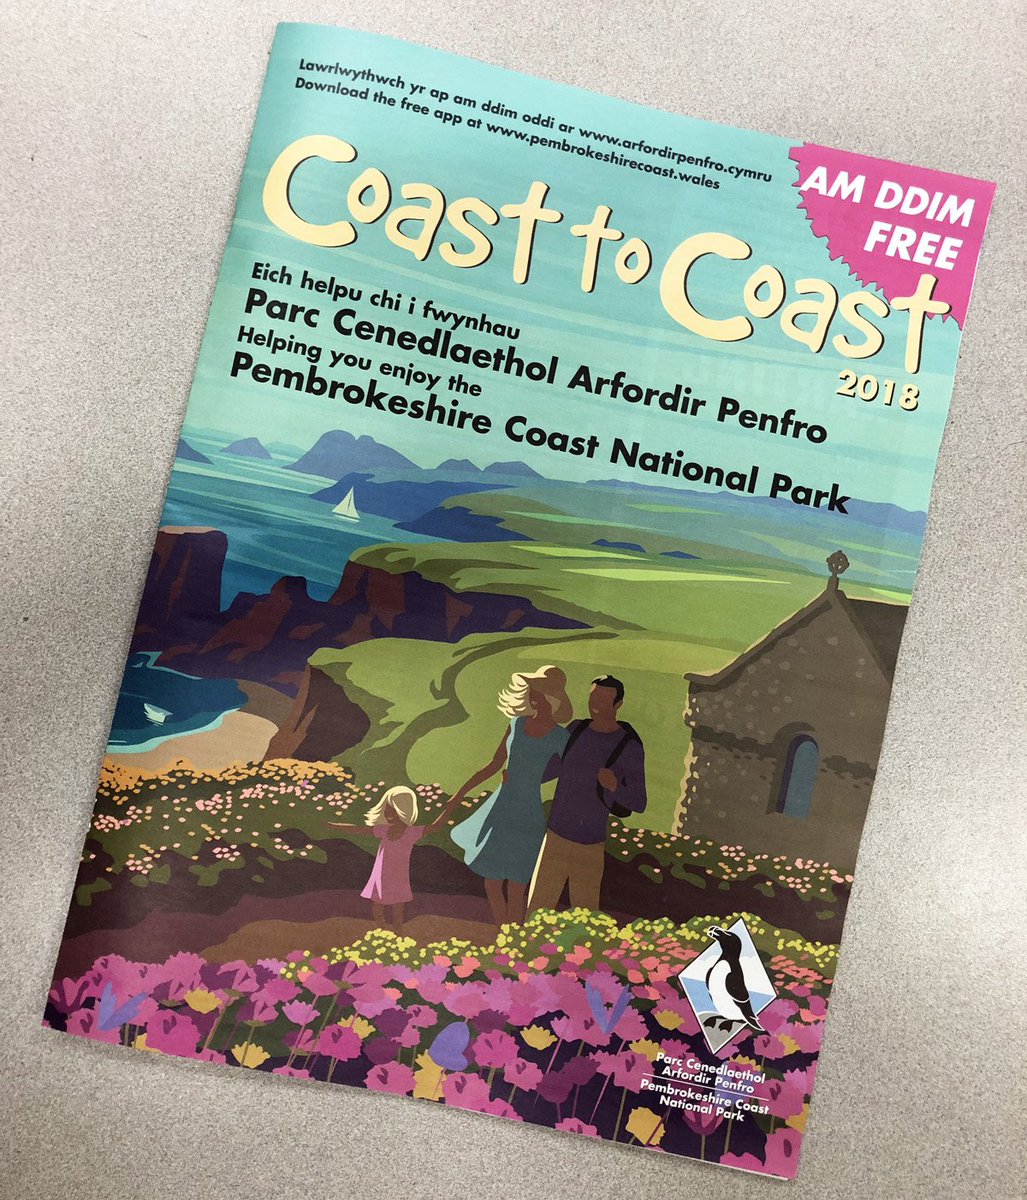 Exciting news! #CoasttoCoast2018 will be available across #Pembrokeshire from this weekend onwards! It's the must-have publication if you want to make the most of the Pembrokeshire Coast! Online and app versions coming soon! #FindYourEpic #YearOfTheSea